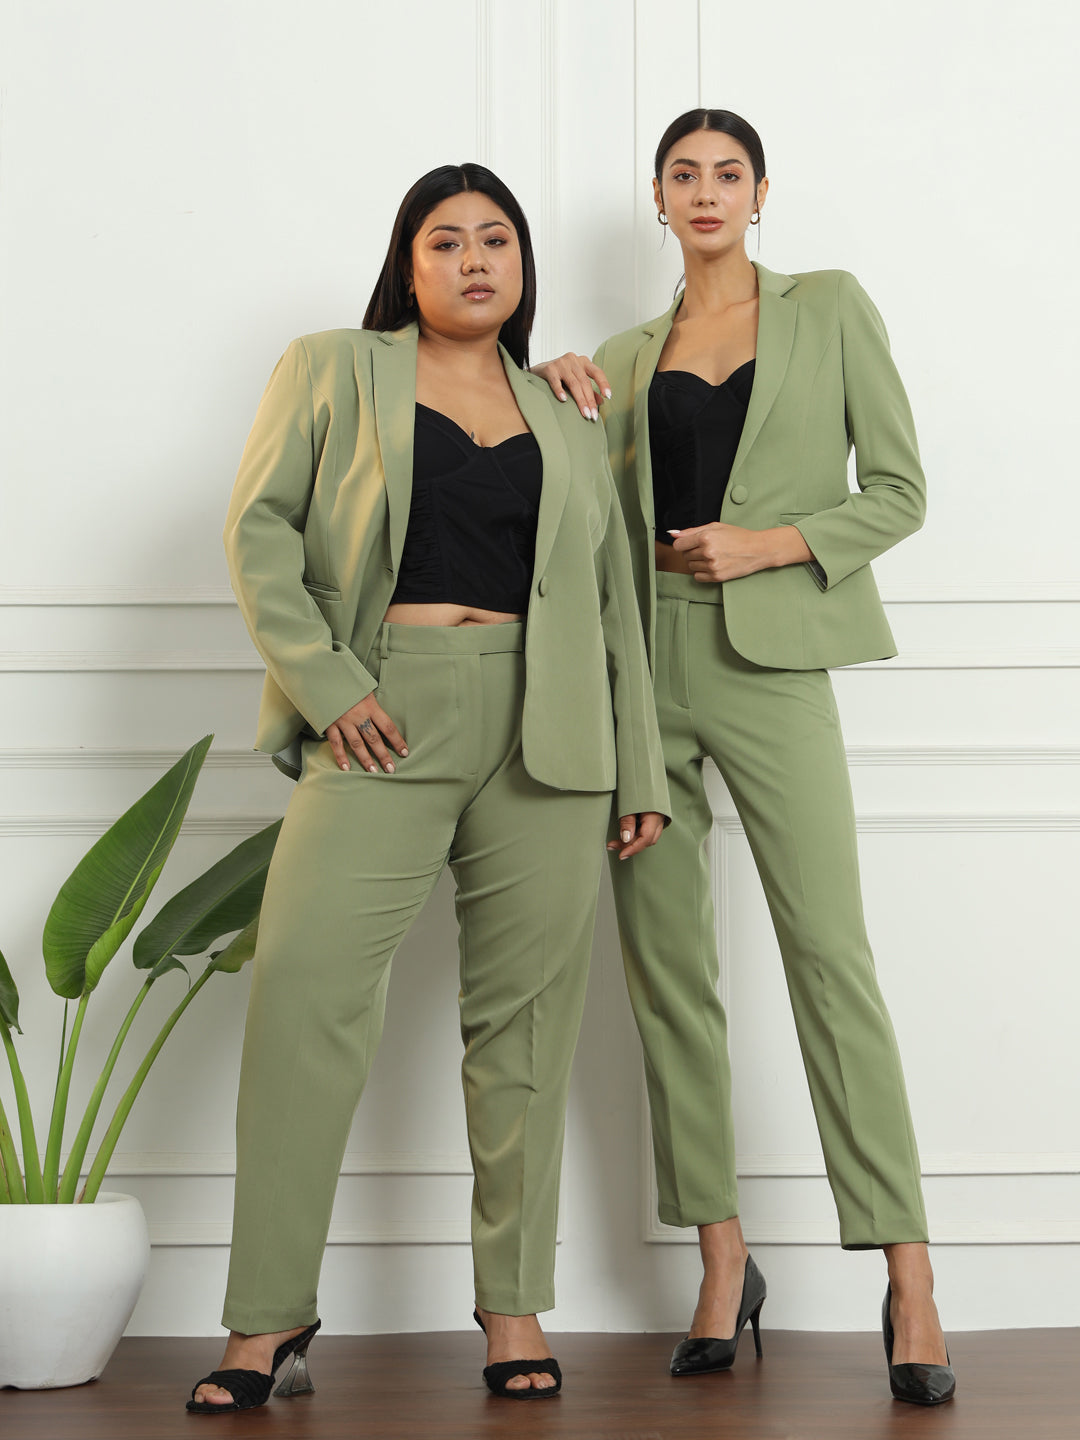 XL-5XL Plus Size Set Women Casual Ladies Top And Pants Suits Two Pieces  Outfits